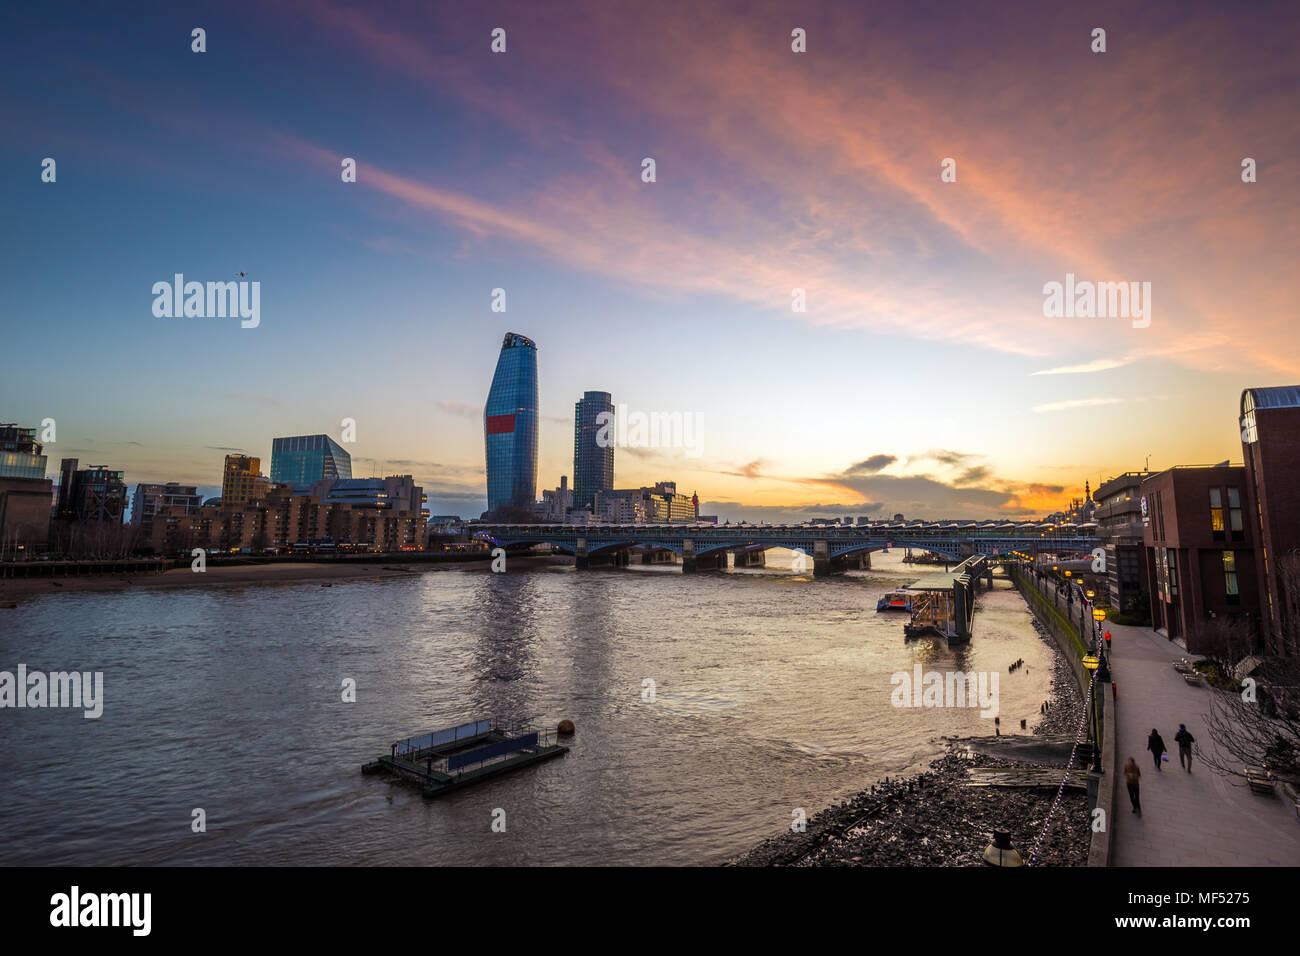 London, England - Beautiful sunset in London with skyscrapers and Blackfriars Bridge over River Thames Stock Photo